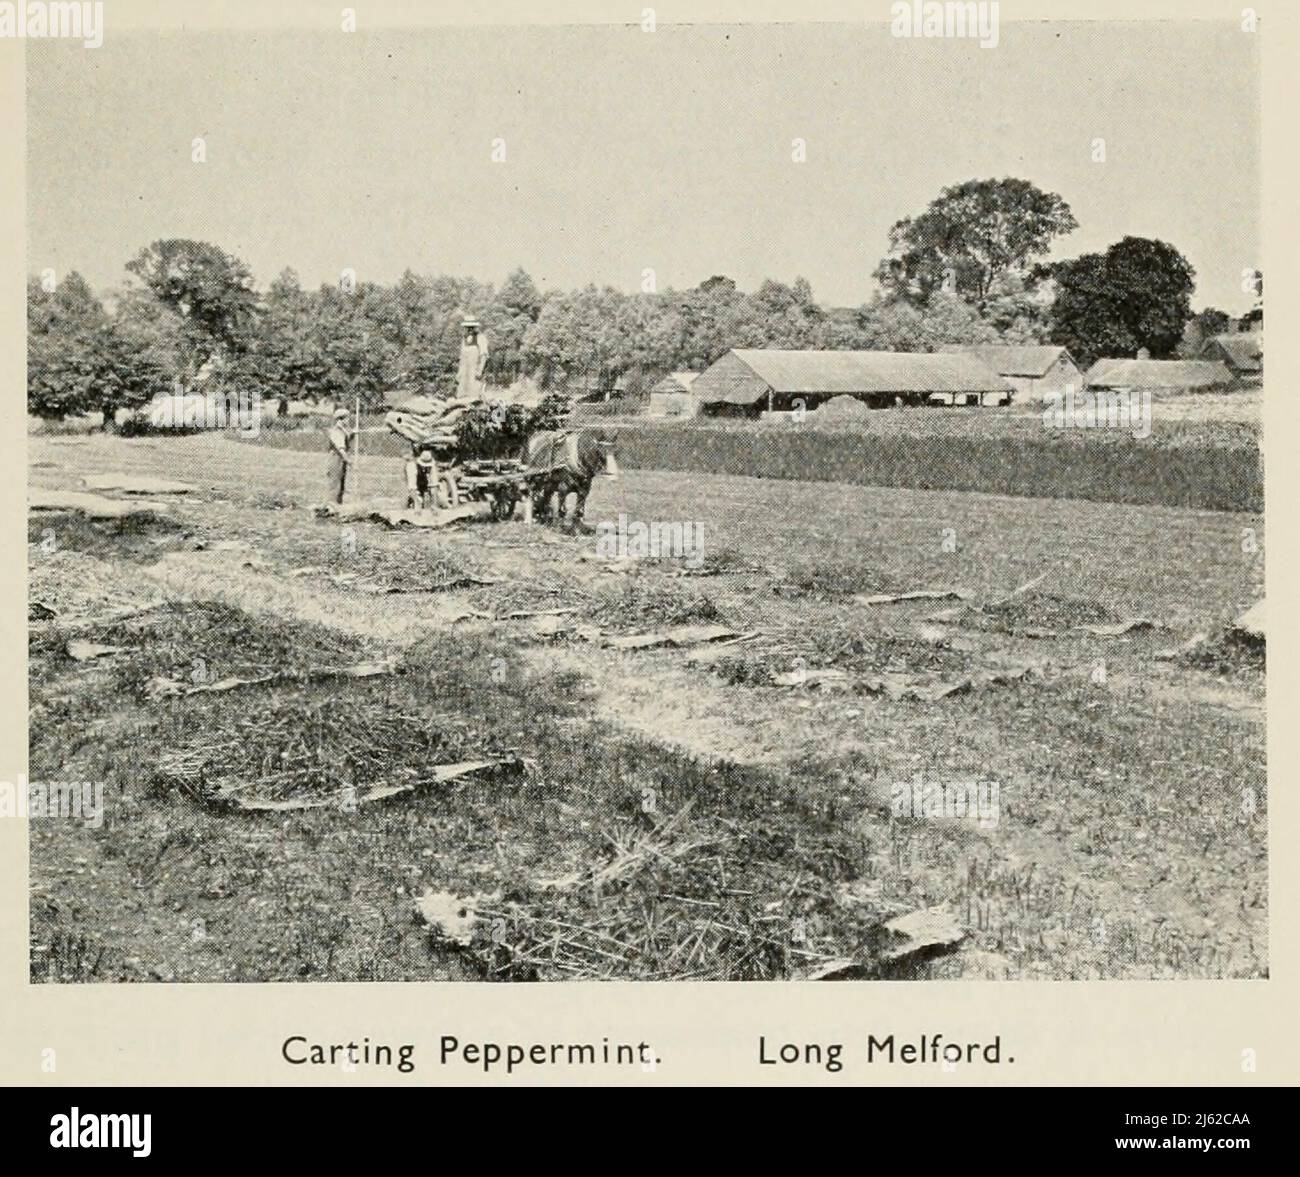 Carting Peppermint. Long Melford from the book ' The romance of Empire drugs ' Published in London by the Scientific Department at Stafford Allen and Sons, Ltd Stock Photo